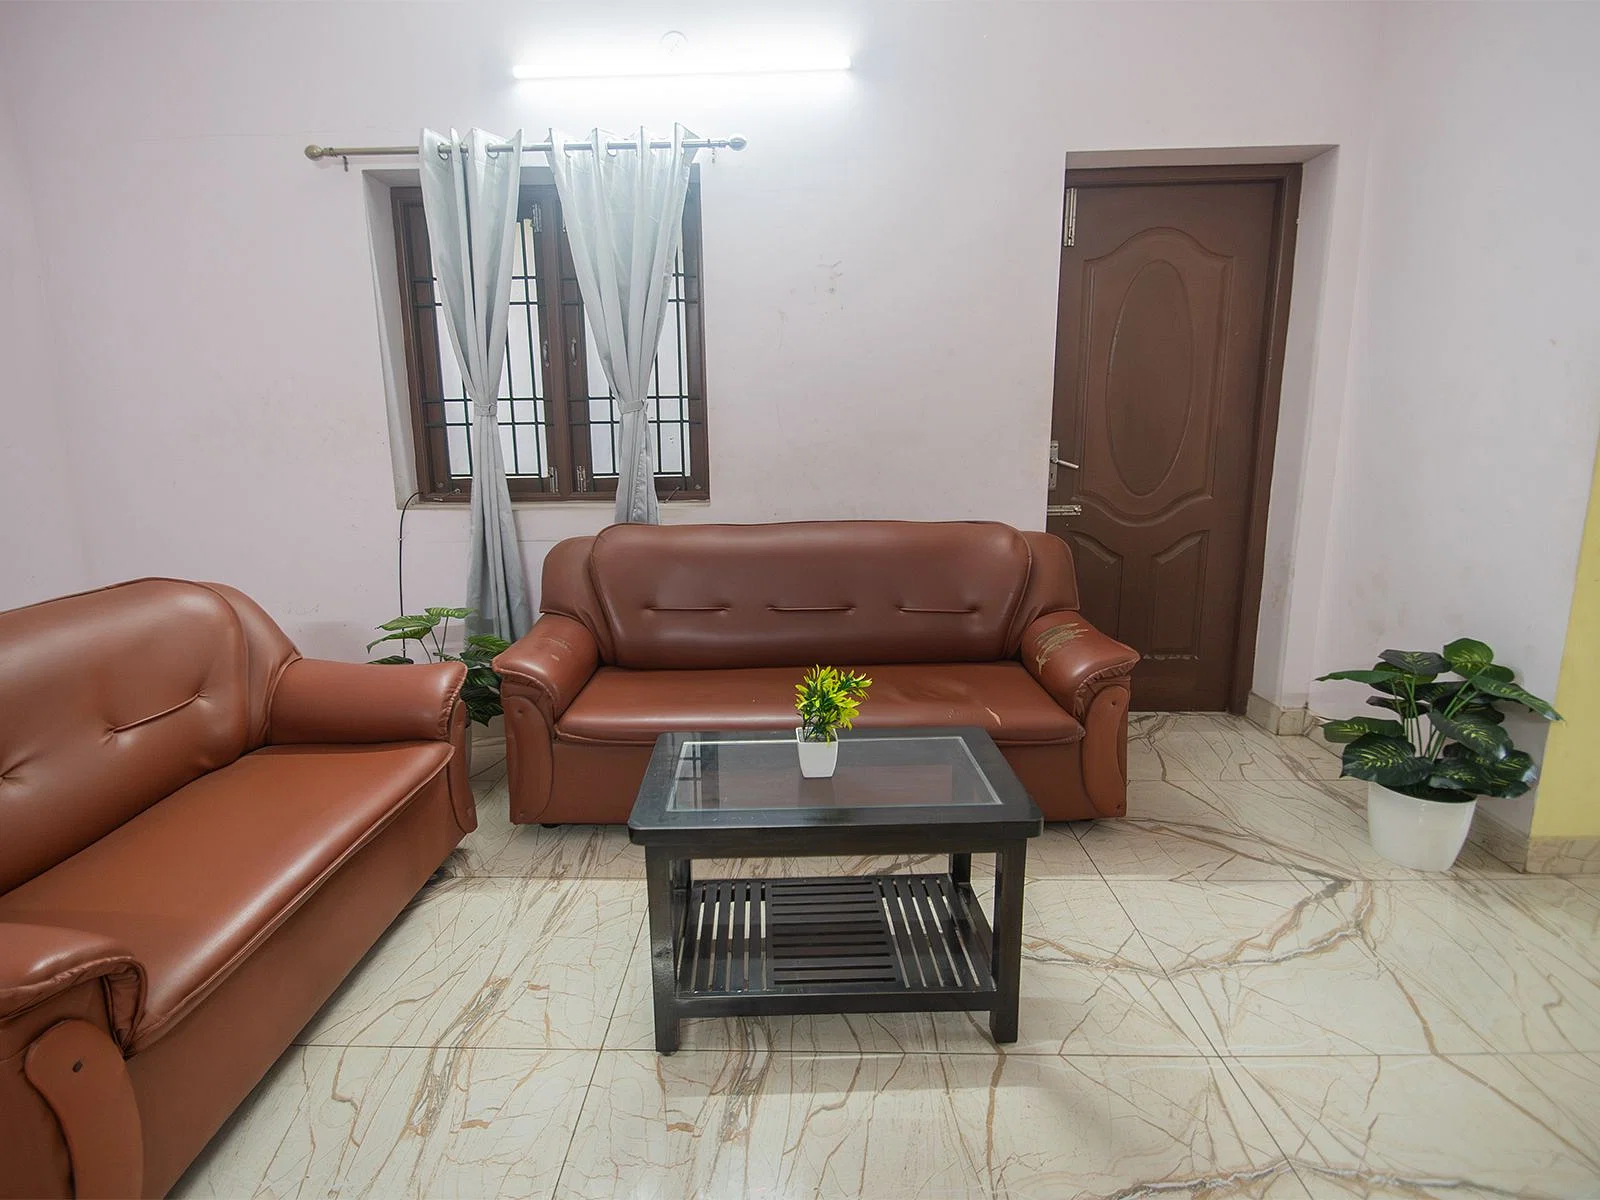 budget-friendly PGs and hostels for unisex with single rooms with daily hopusekeeping-Zolo Park Town